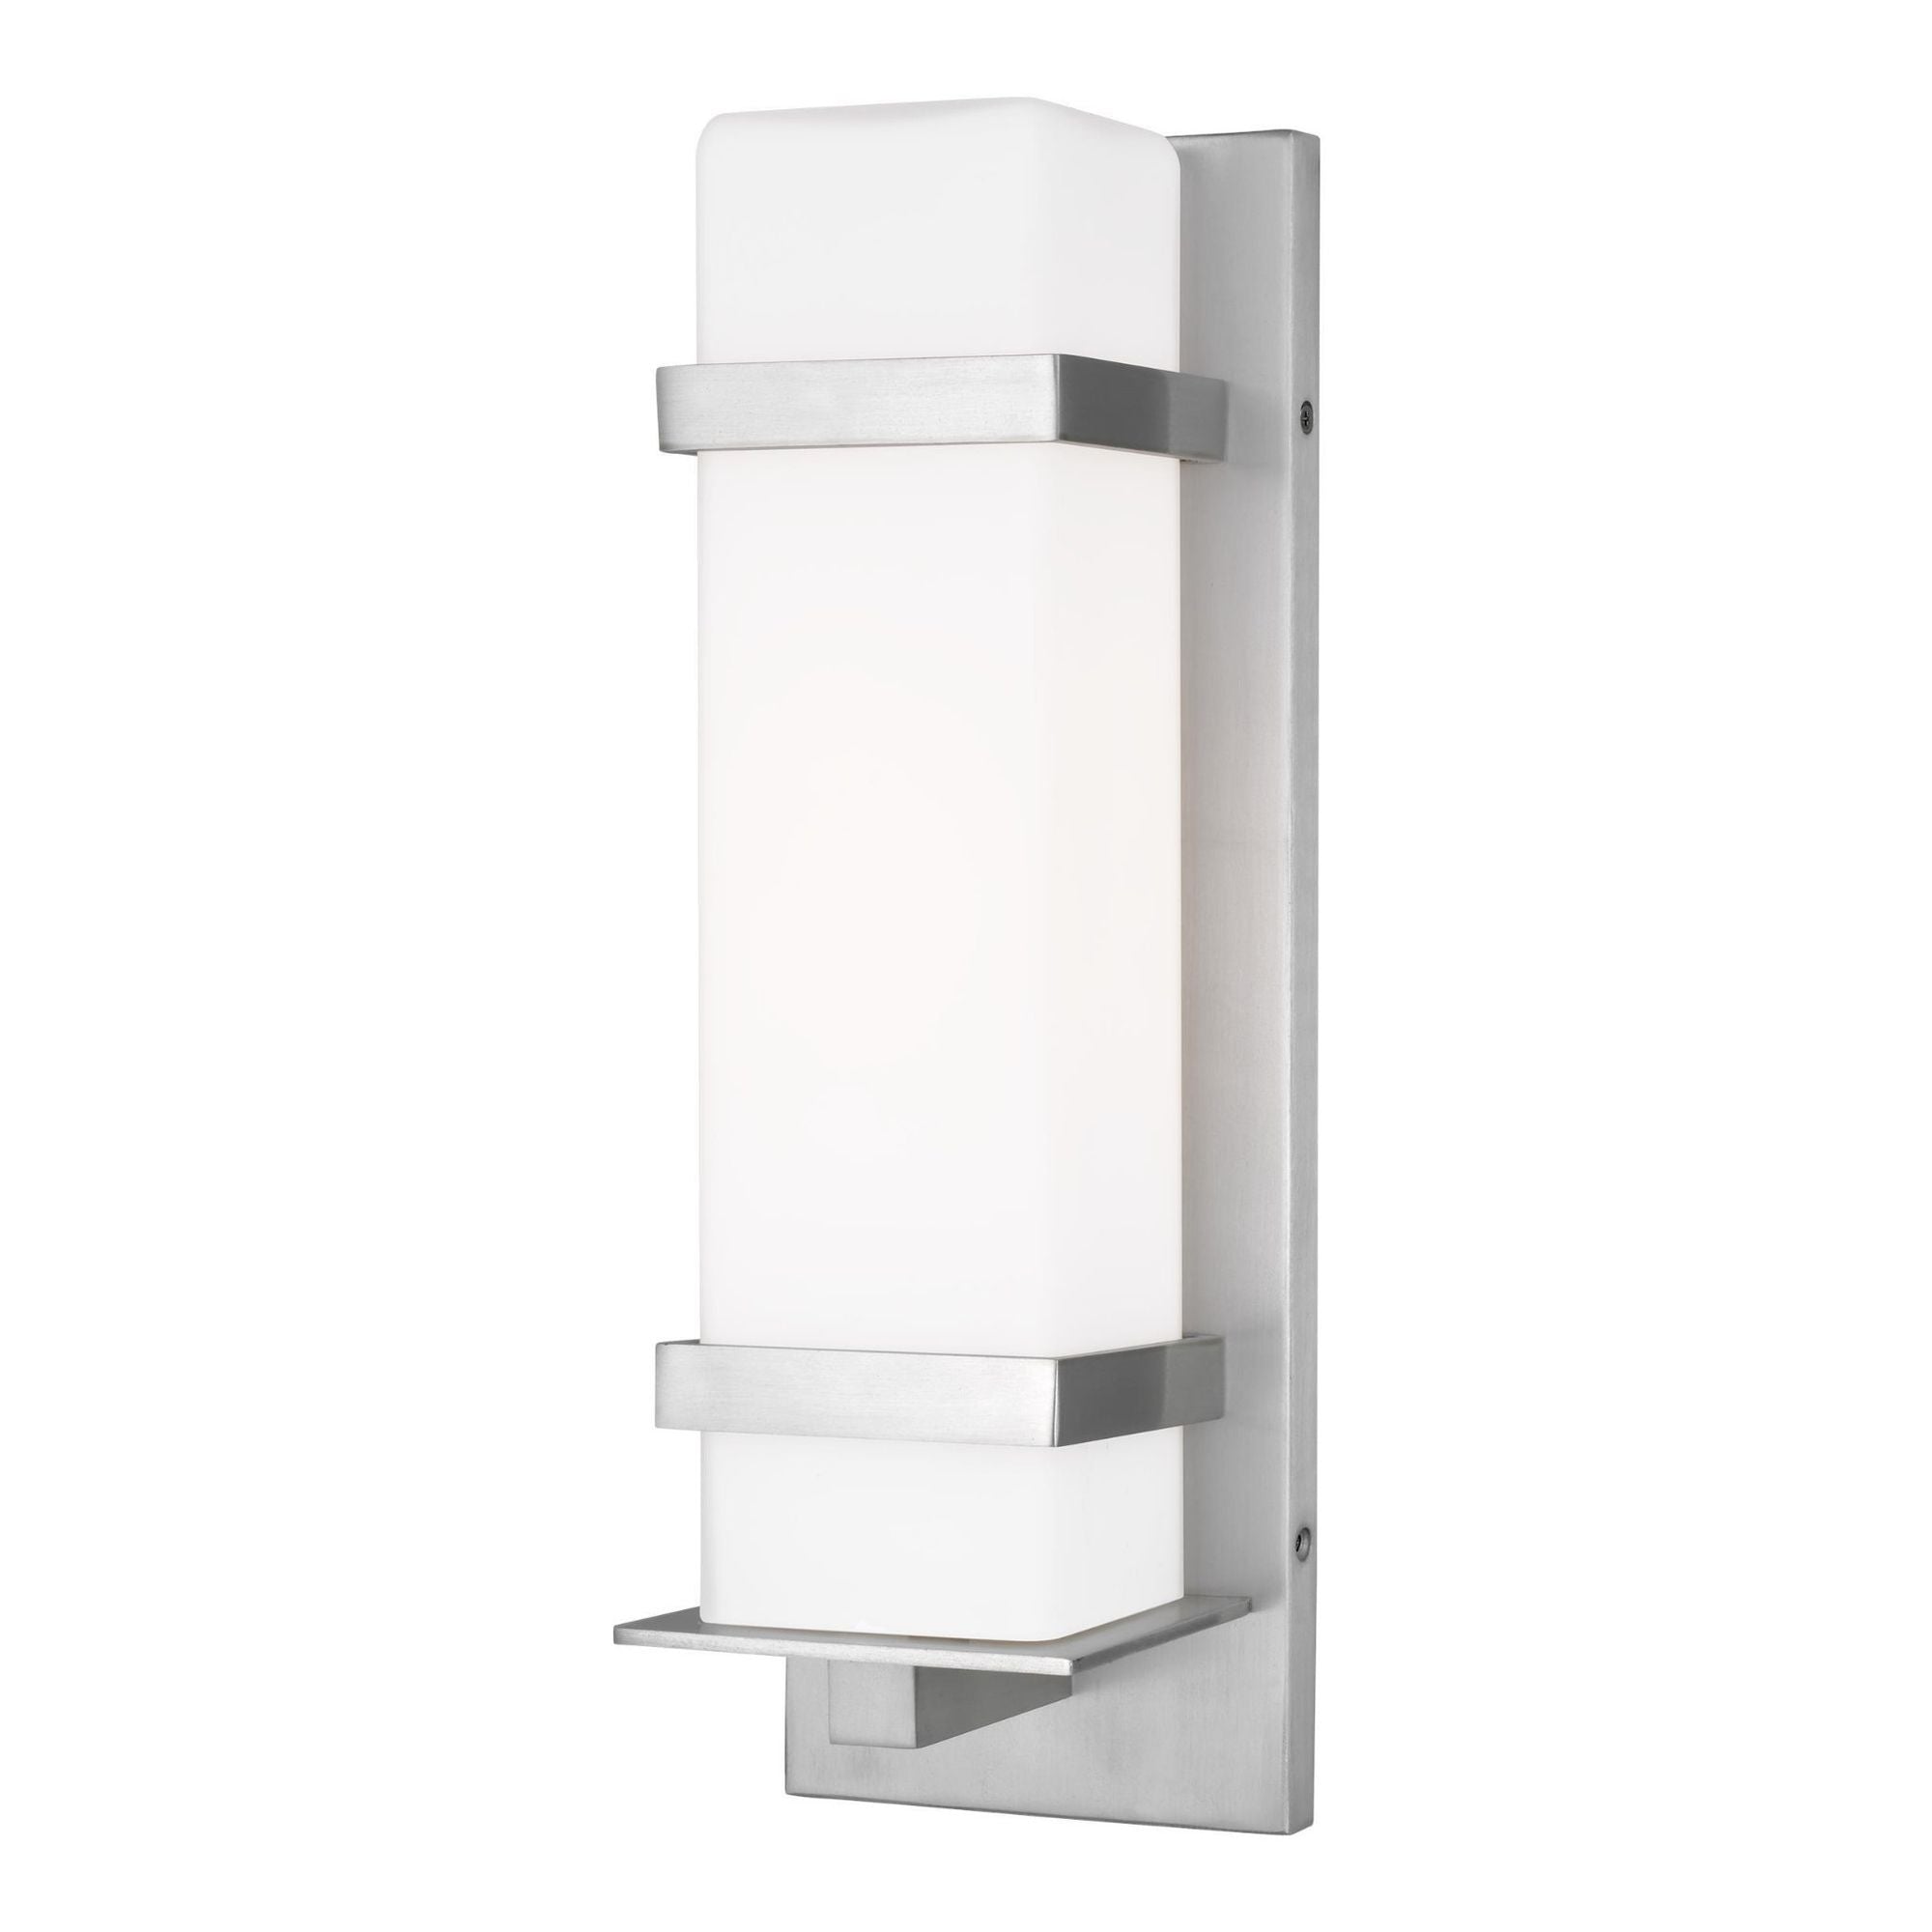 Alban Medium One Light Outdoor Wall Lantern Modern Fixture 6" Width 18" Height Aluminum Square Etched Opal Shade in Satin